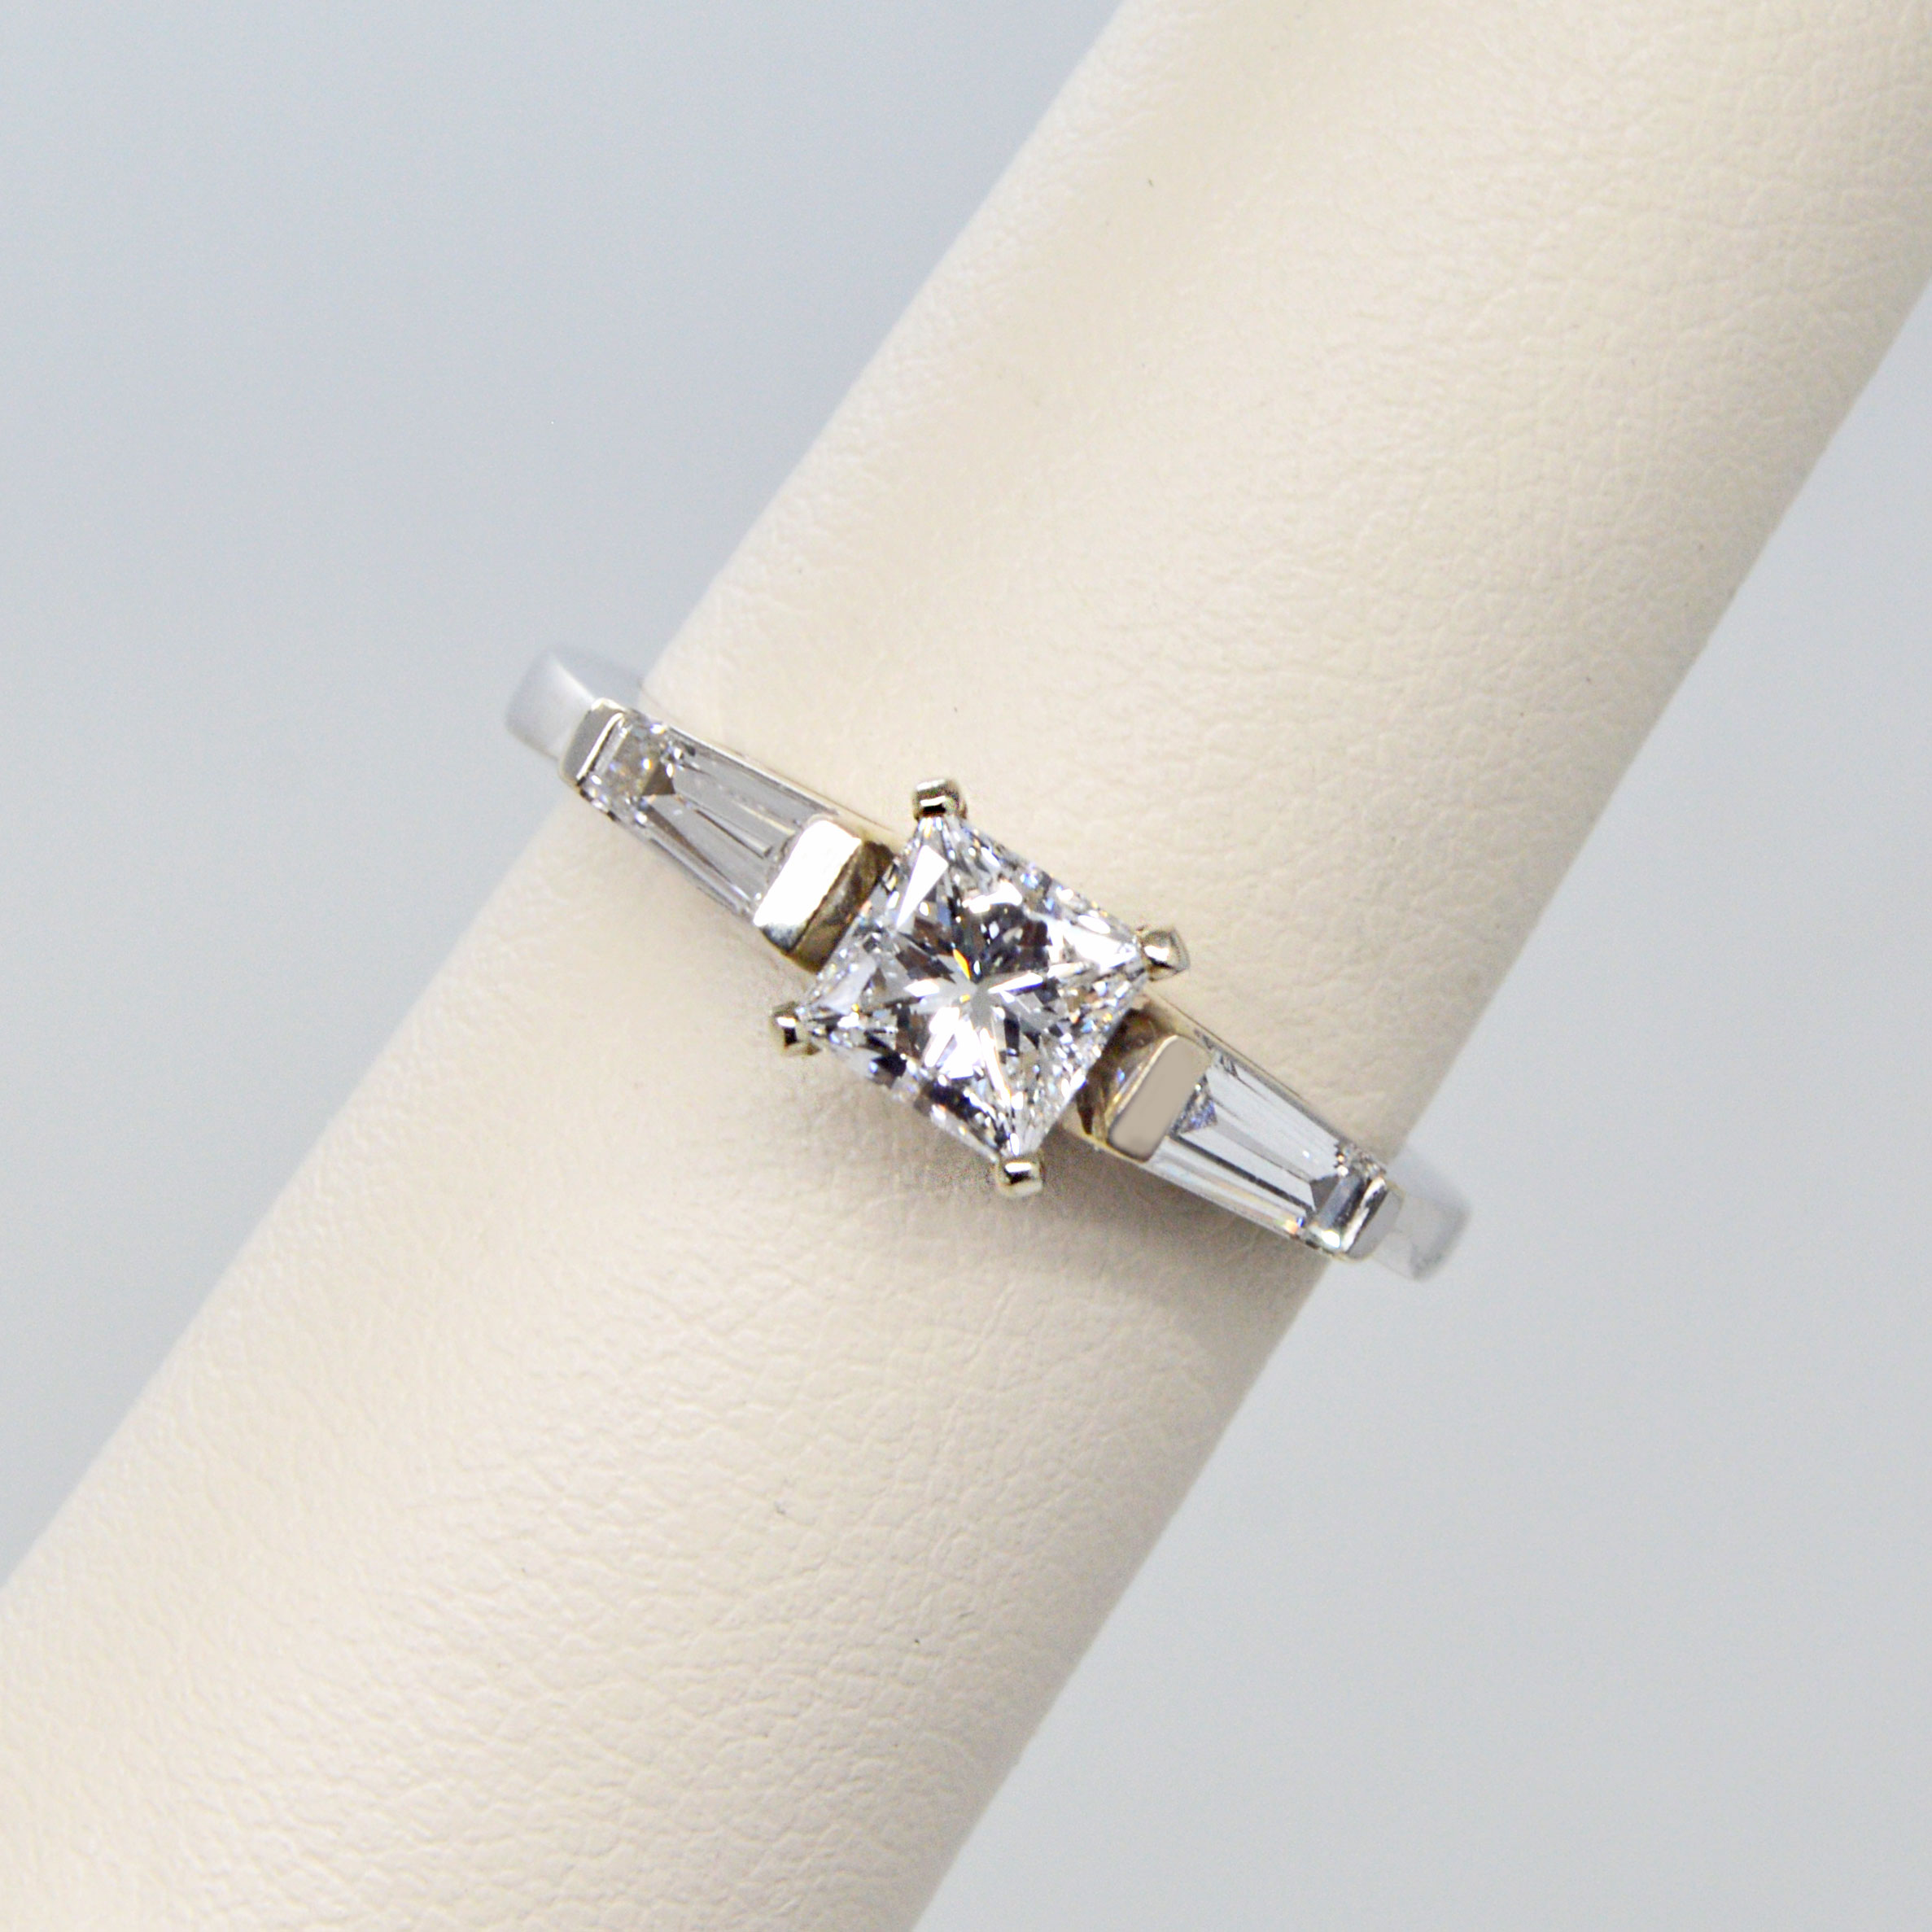 3-stone ring with princess cut center stone and baguette side stones in 14k white gold